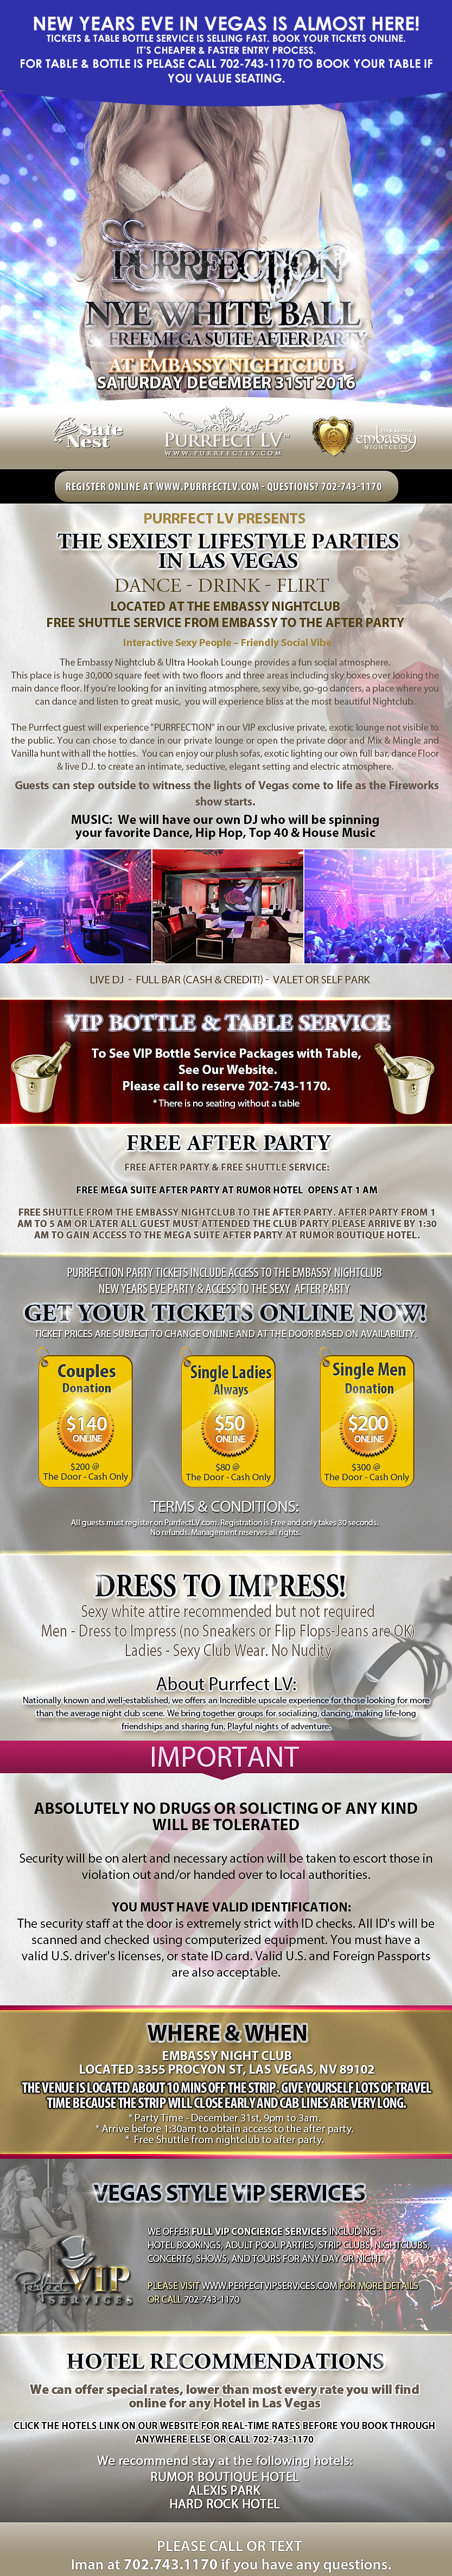 New Years Eve Party Las Vegas 2016- Sexy Lifestyle Party Purrfect LV